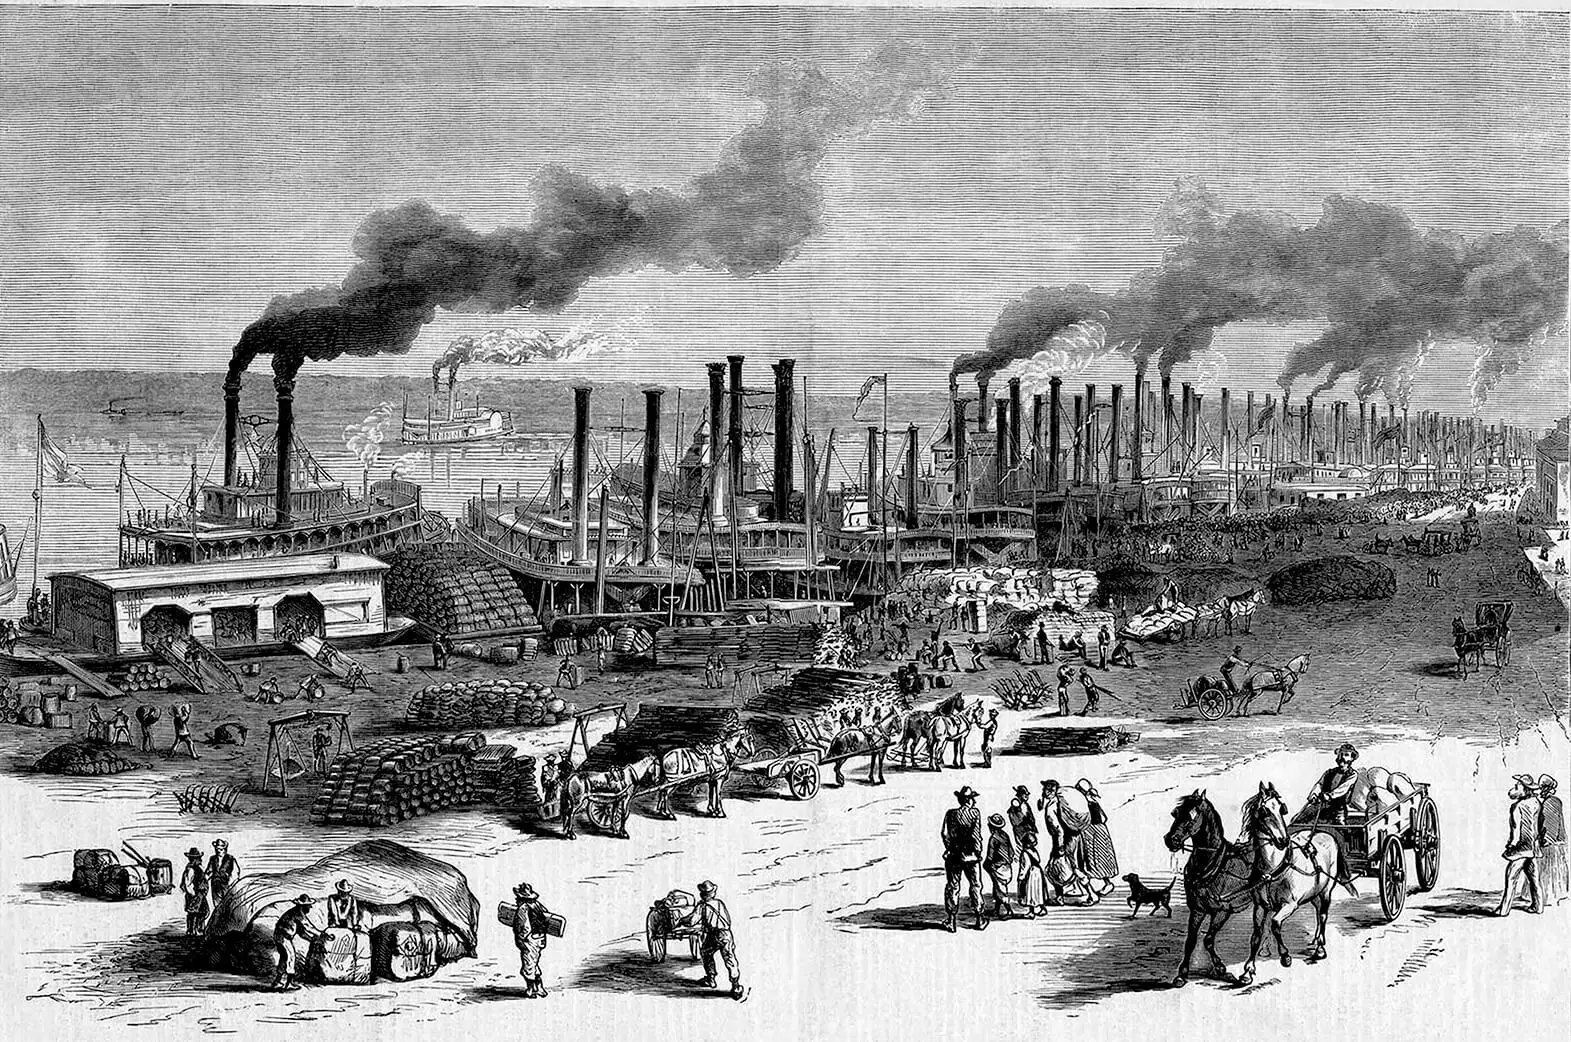 Black and white illustration of steamboats on a riverbank.